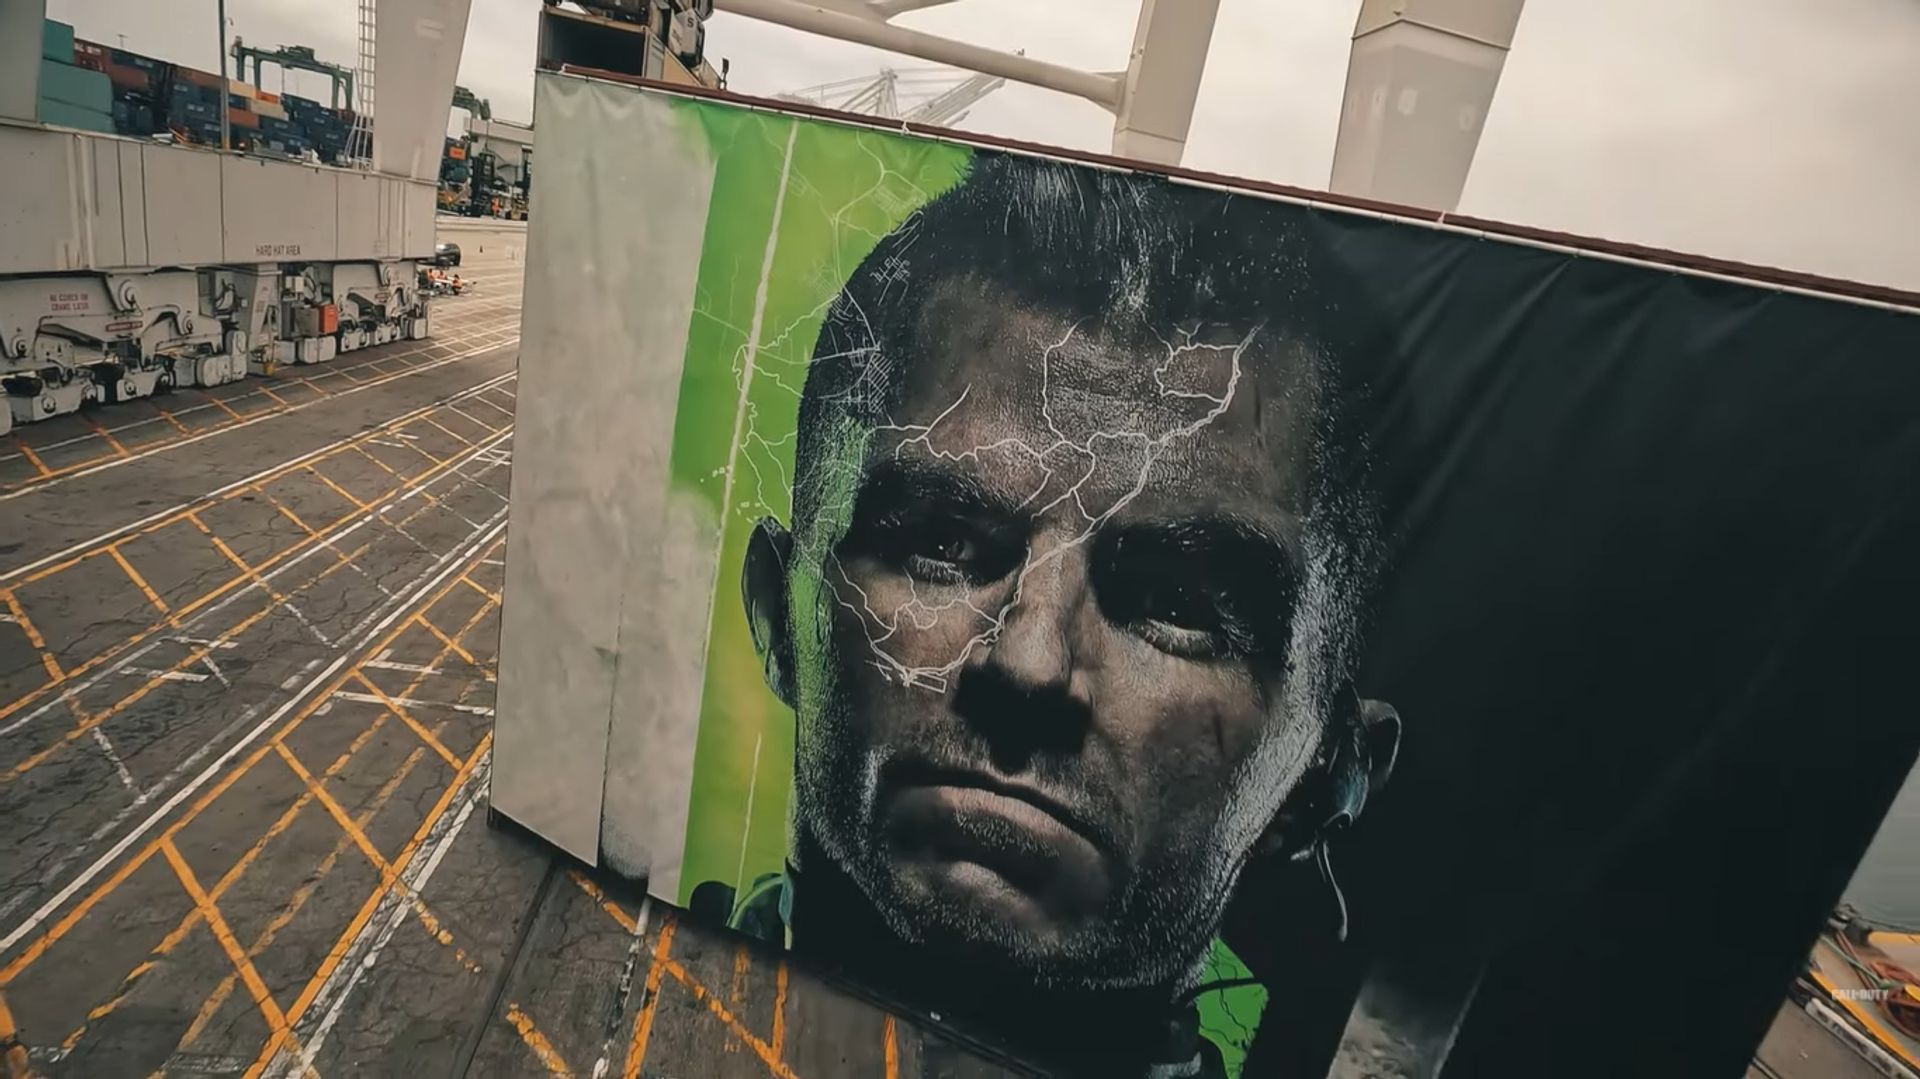 Call of Duty: Modern Warfare 2 reveal seemingly teased for June